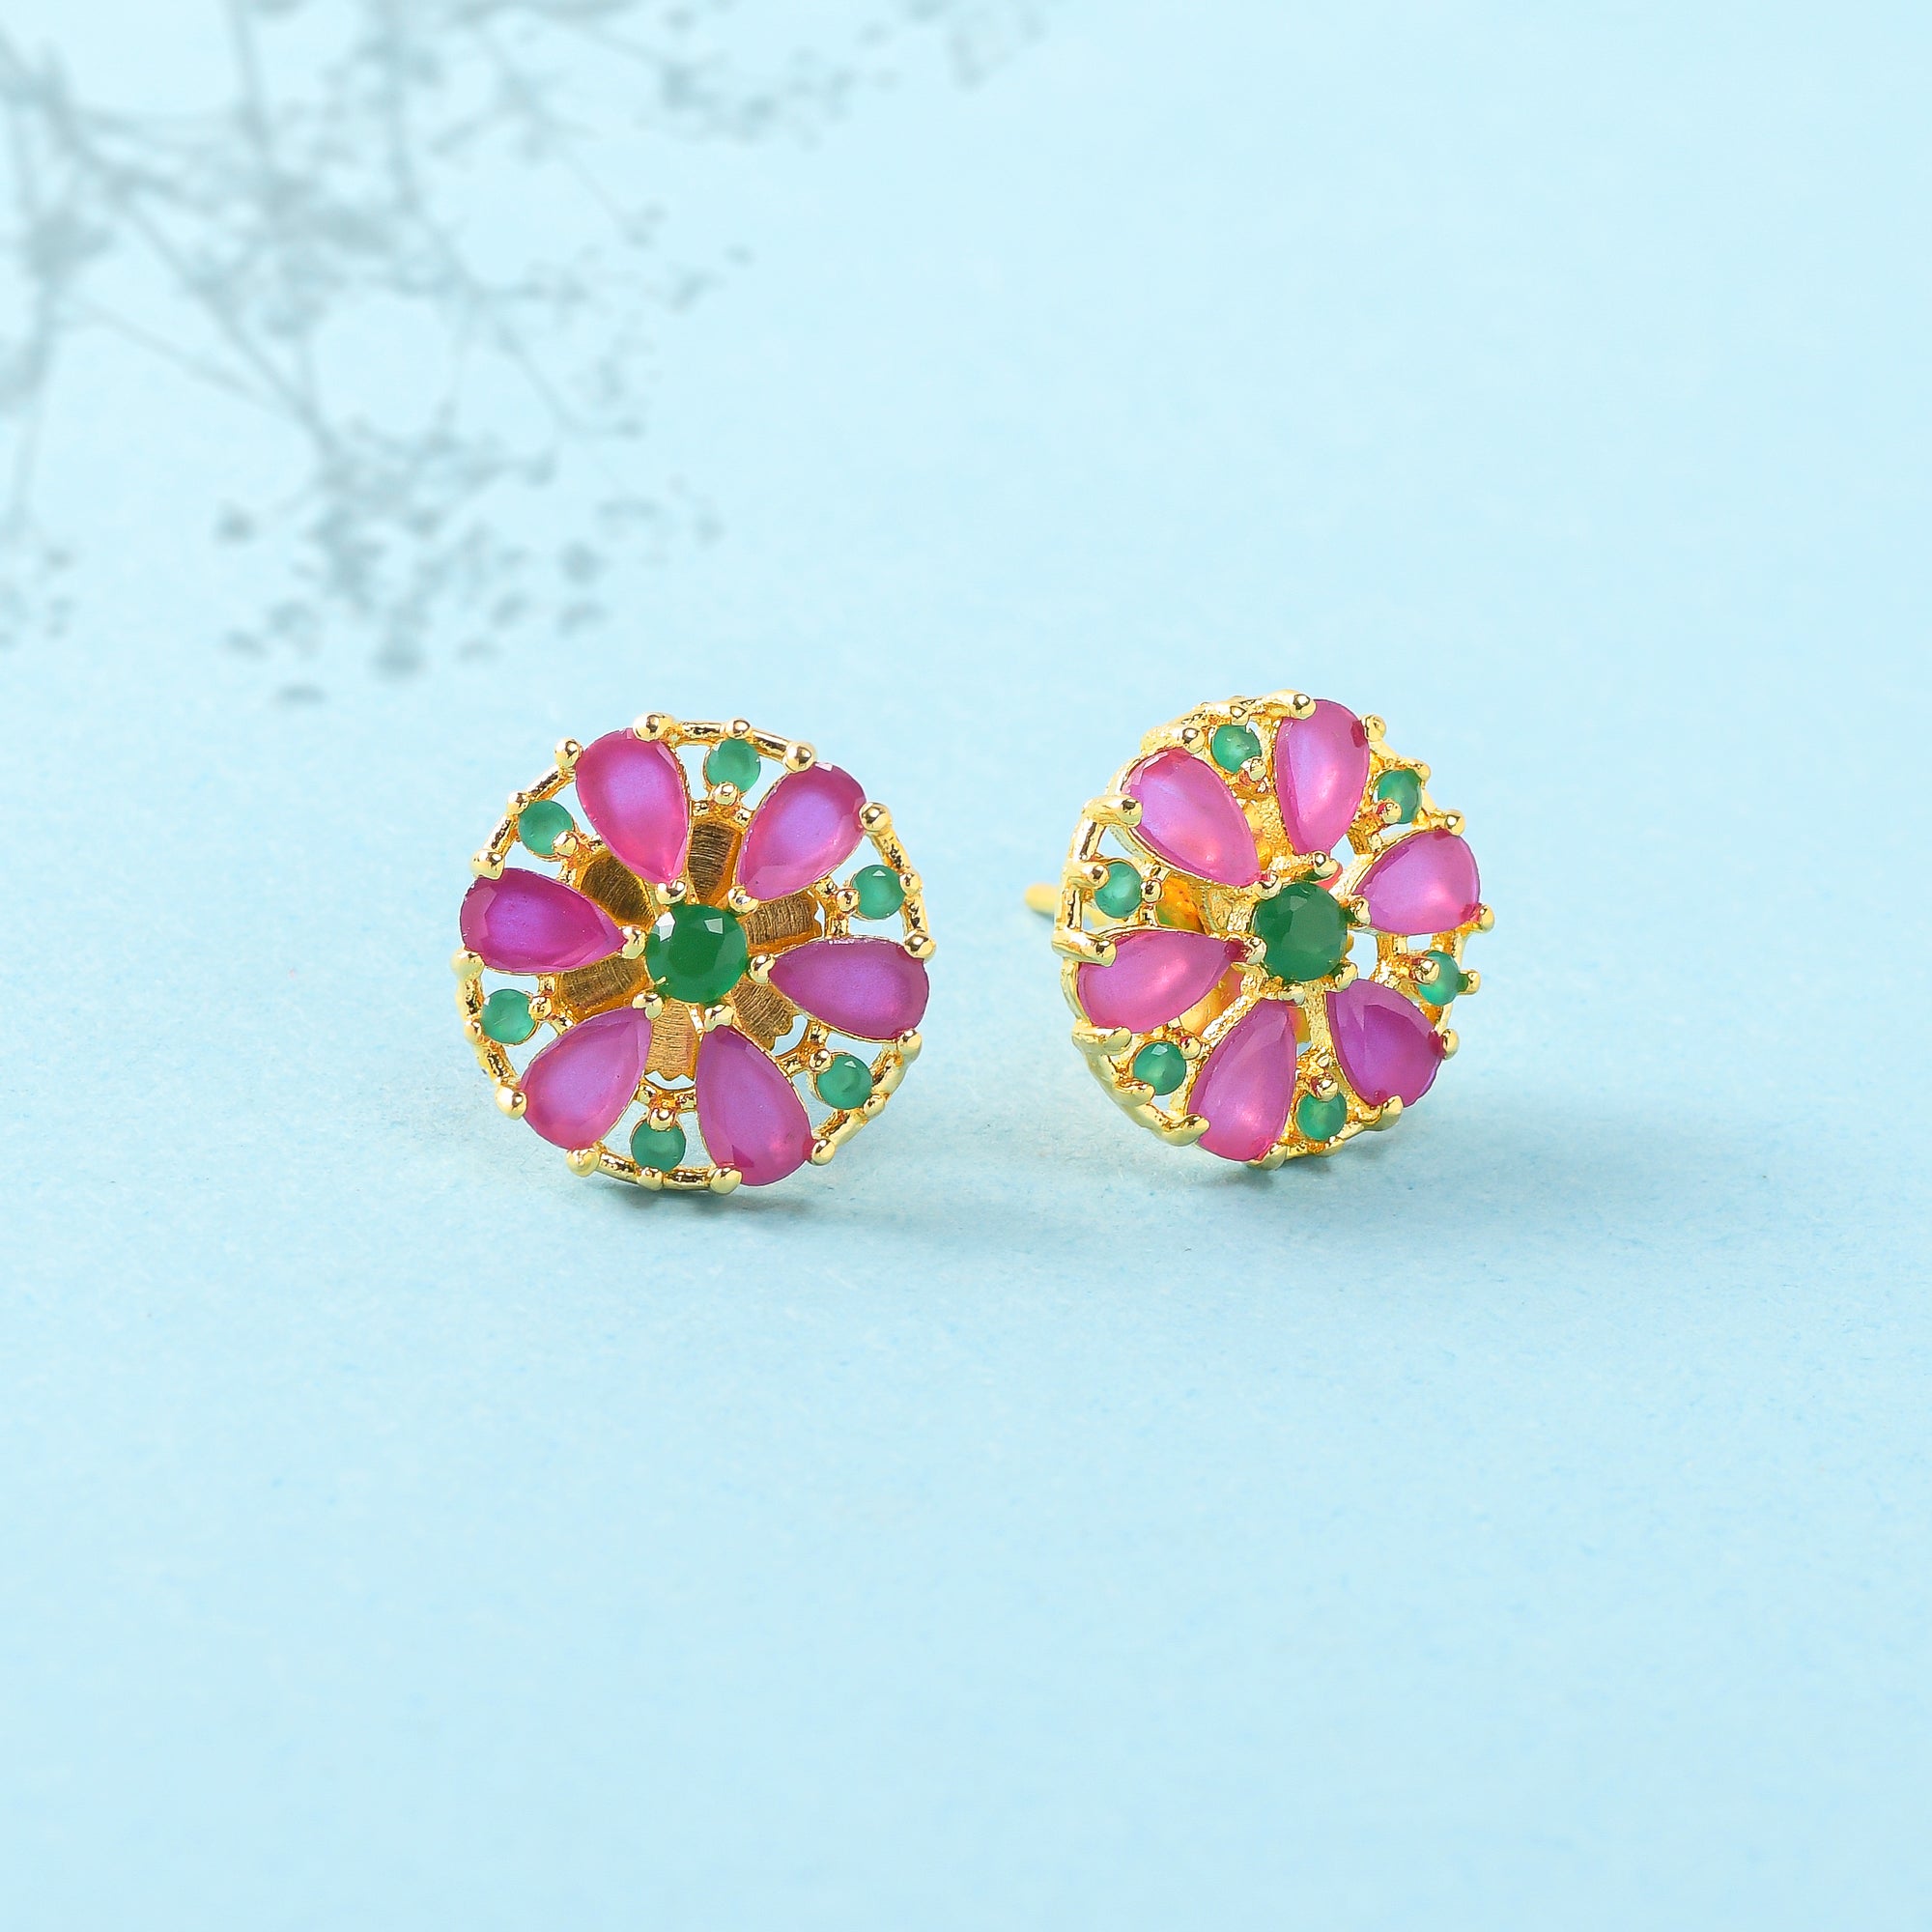 Women's Round Pink And Green Cz Gems Stud Earrings - Voylla